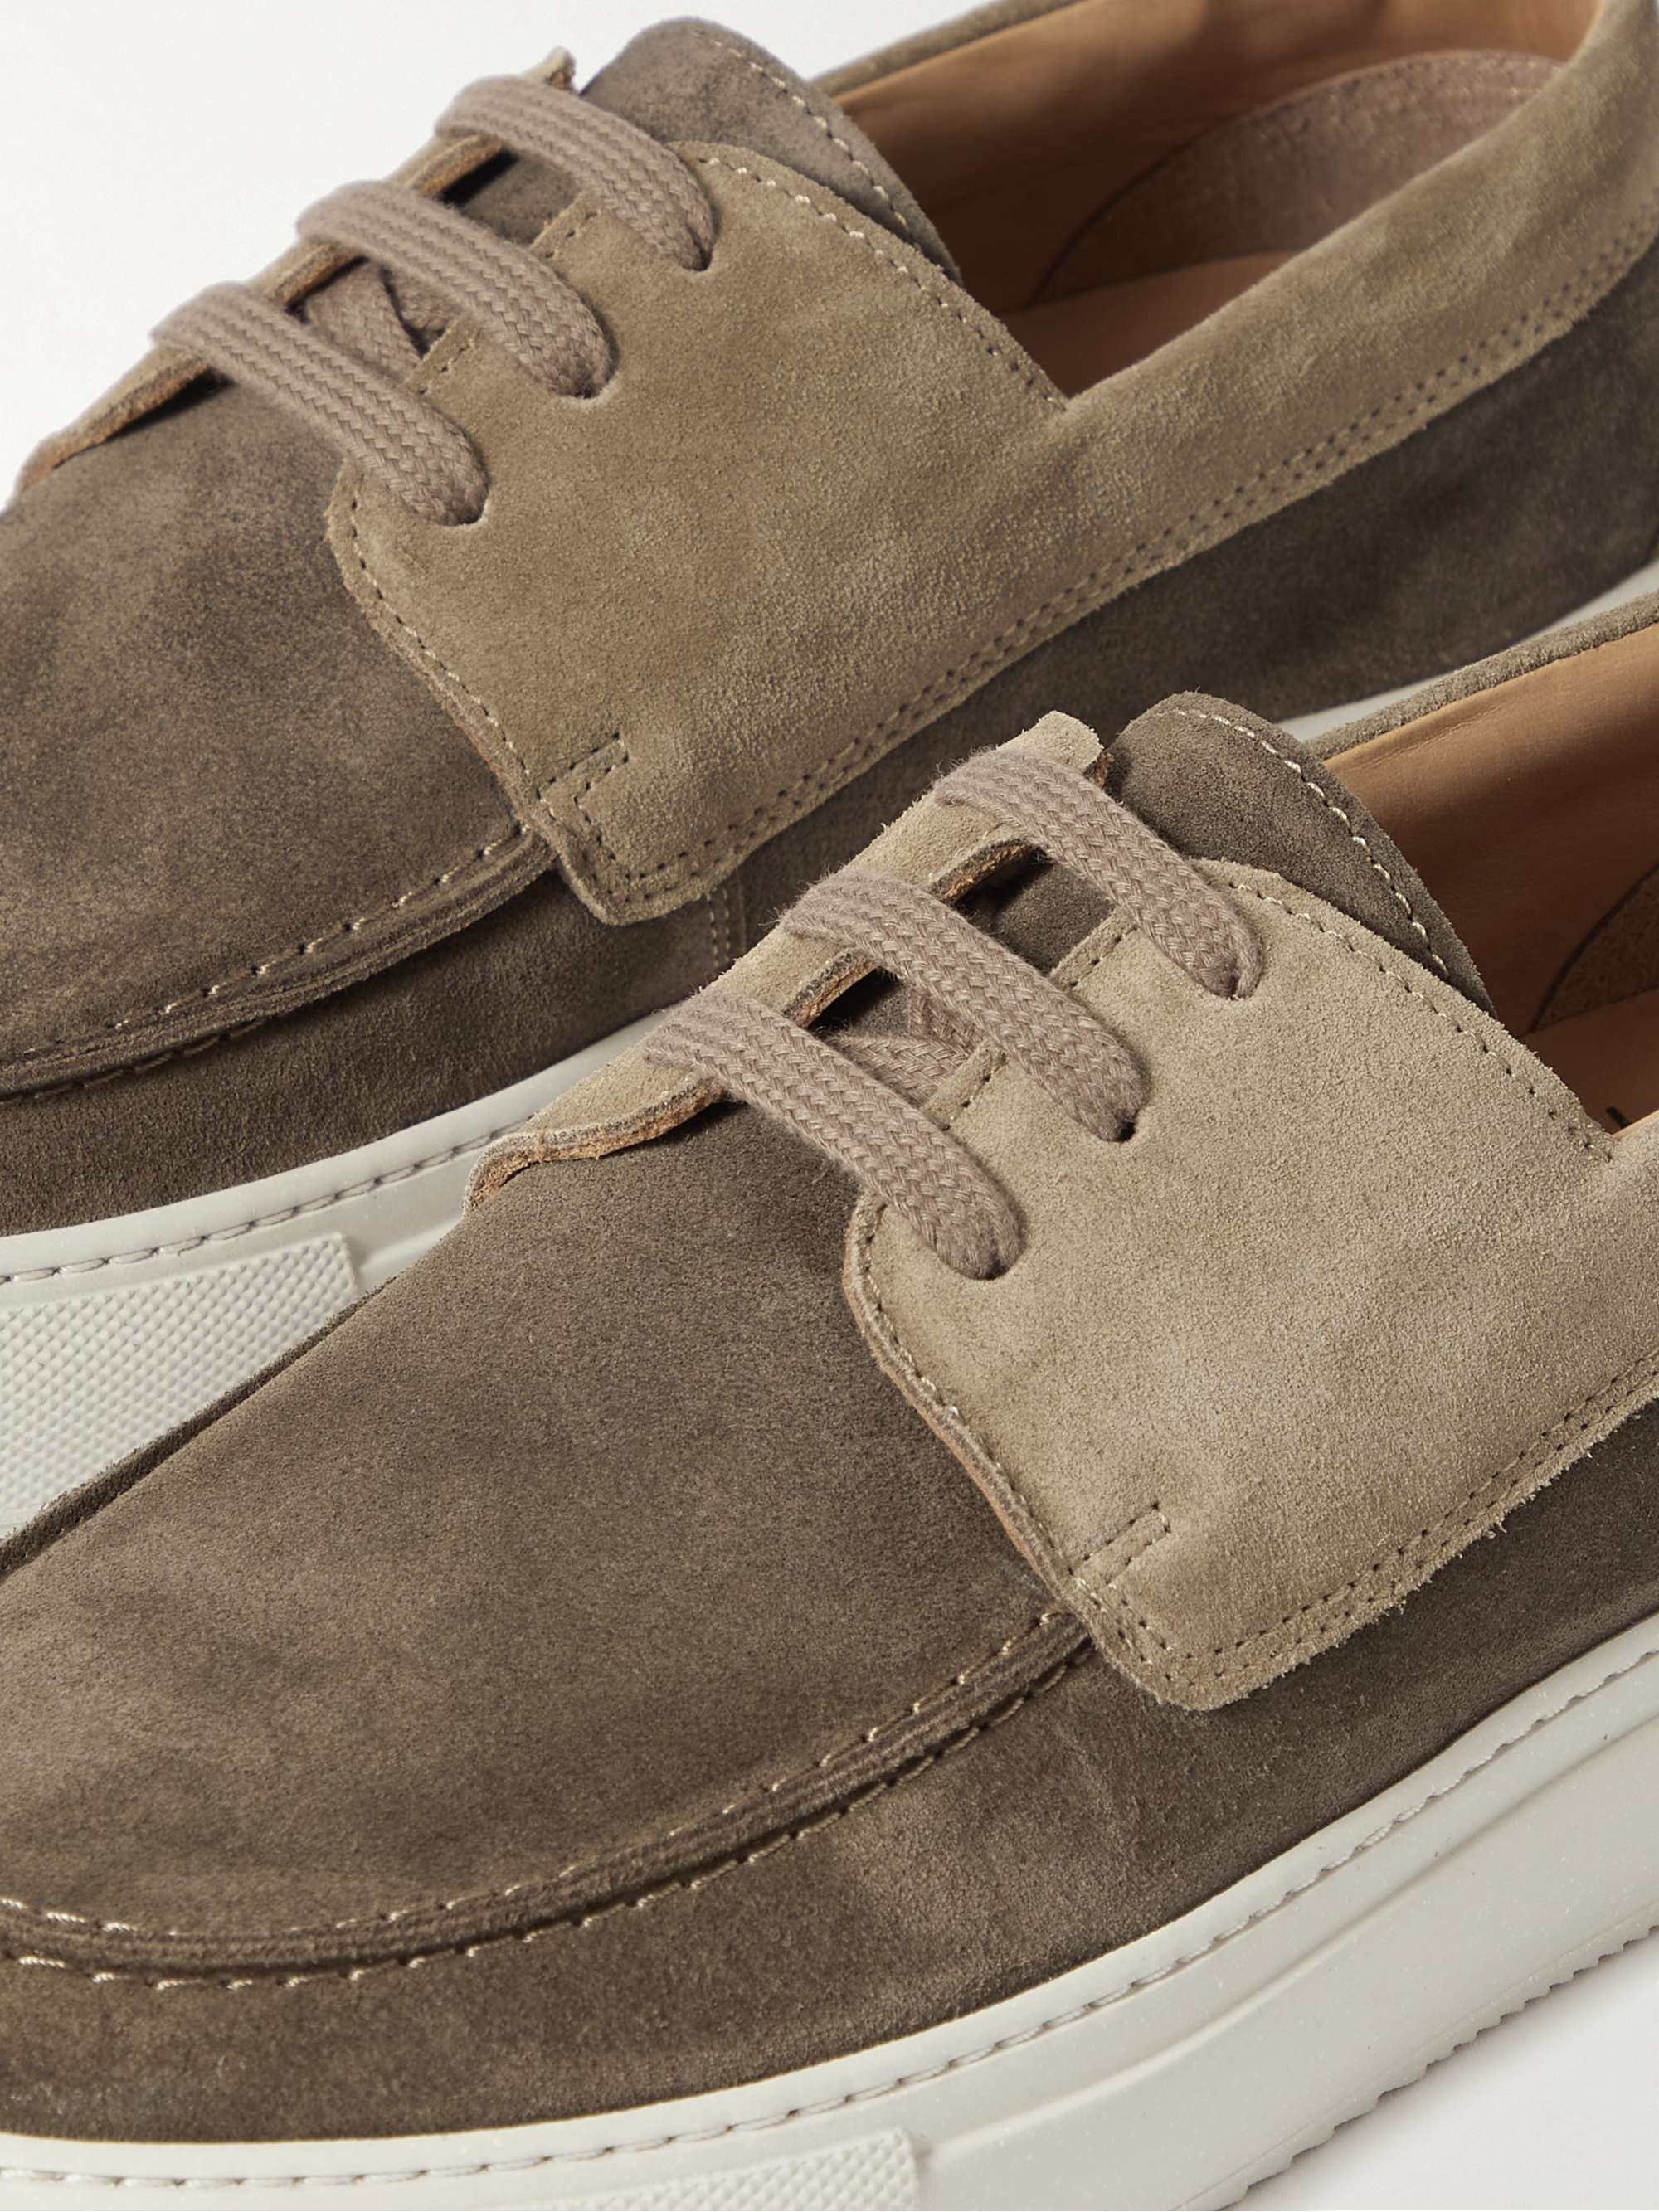 MR P. Larry Two-Tone Regenerated Suede by evolo® Boat Shoes